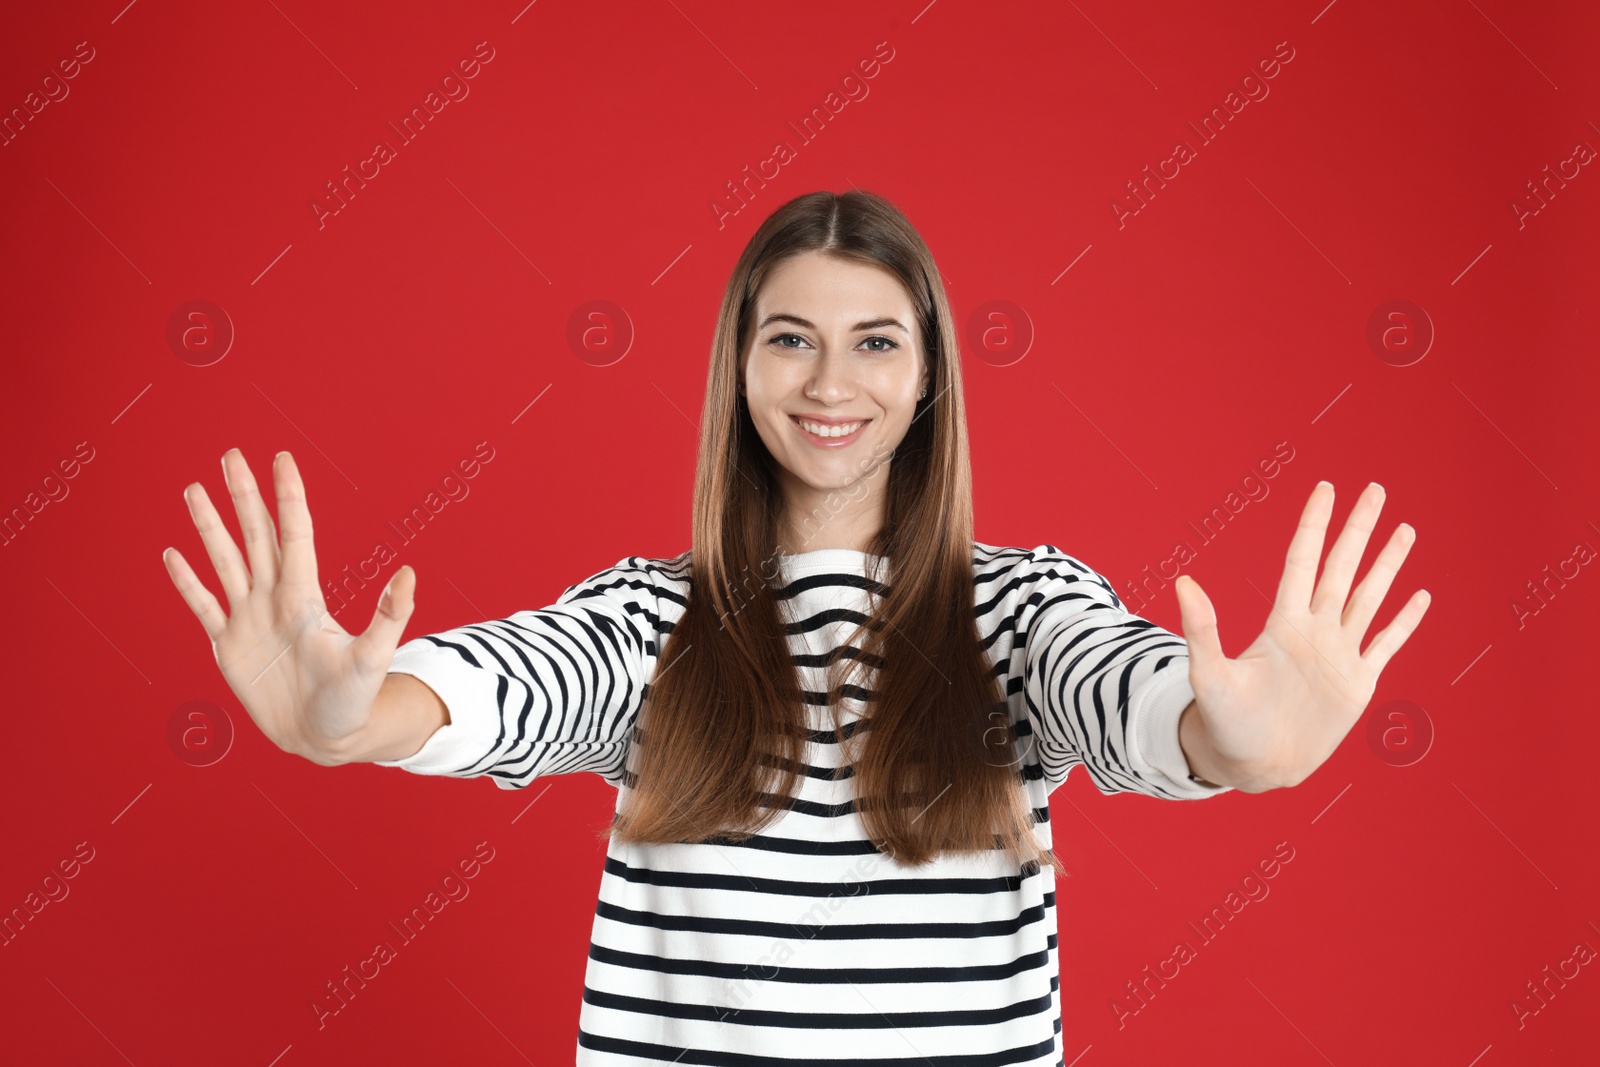 Photo of Woman showing number ten with her hands on red background